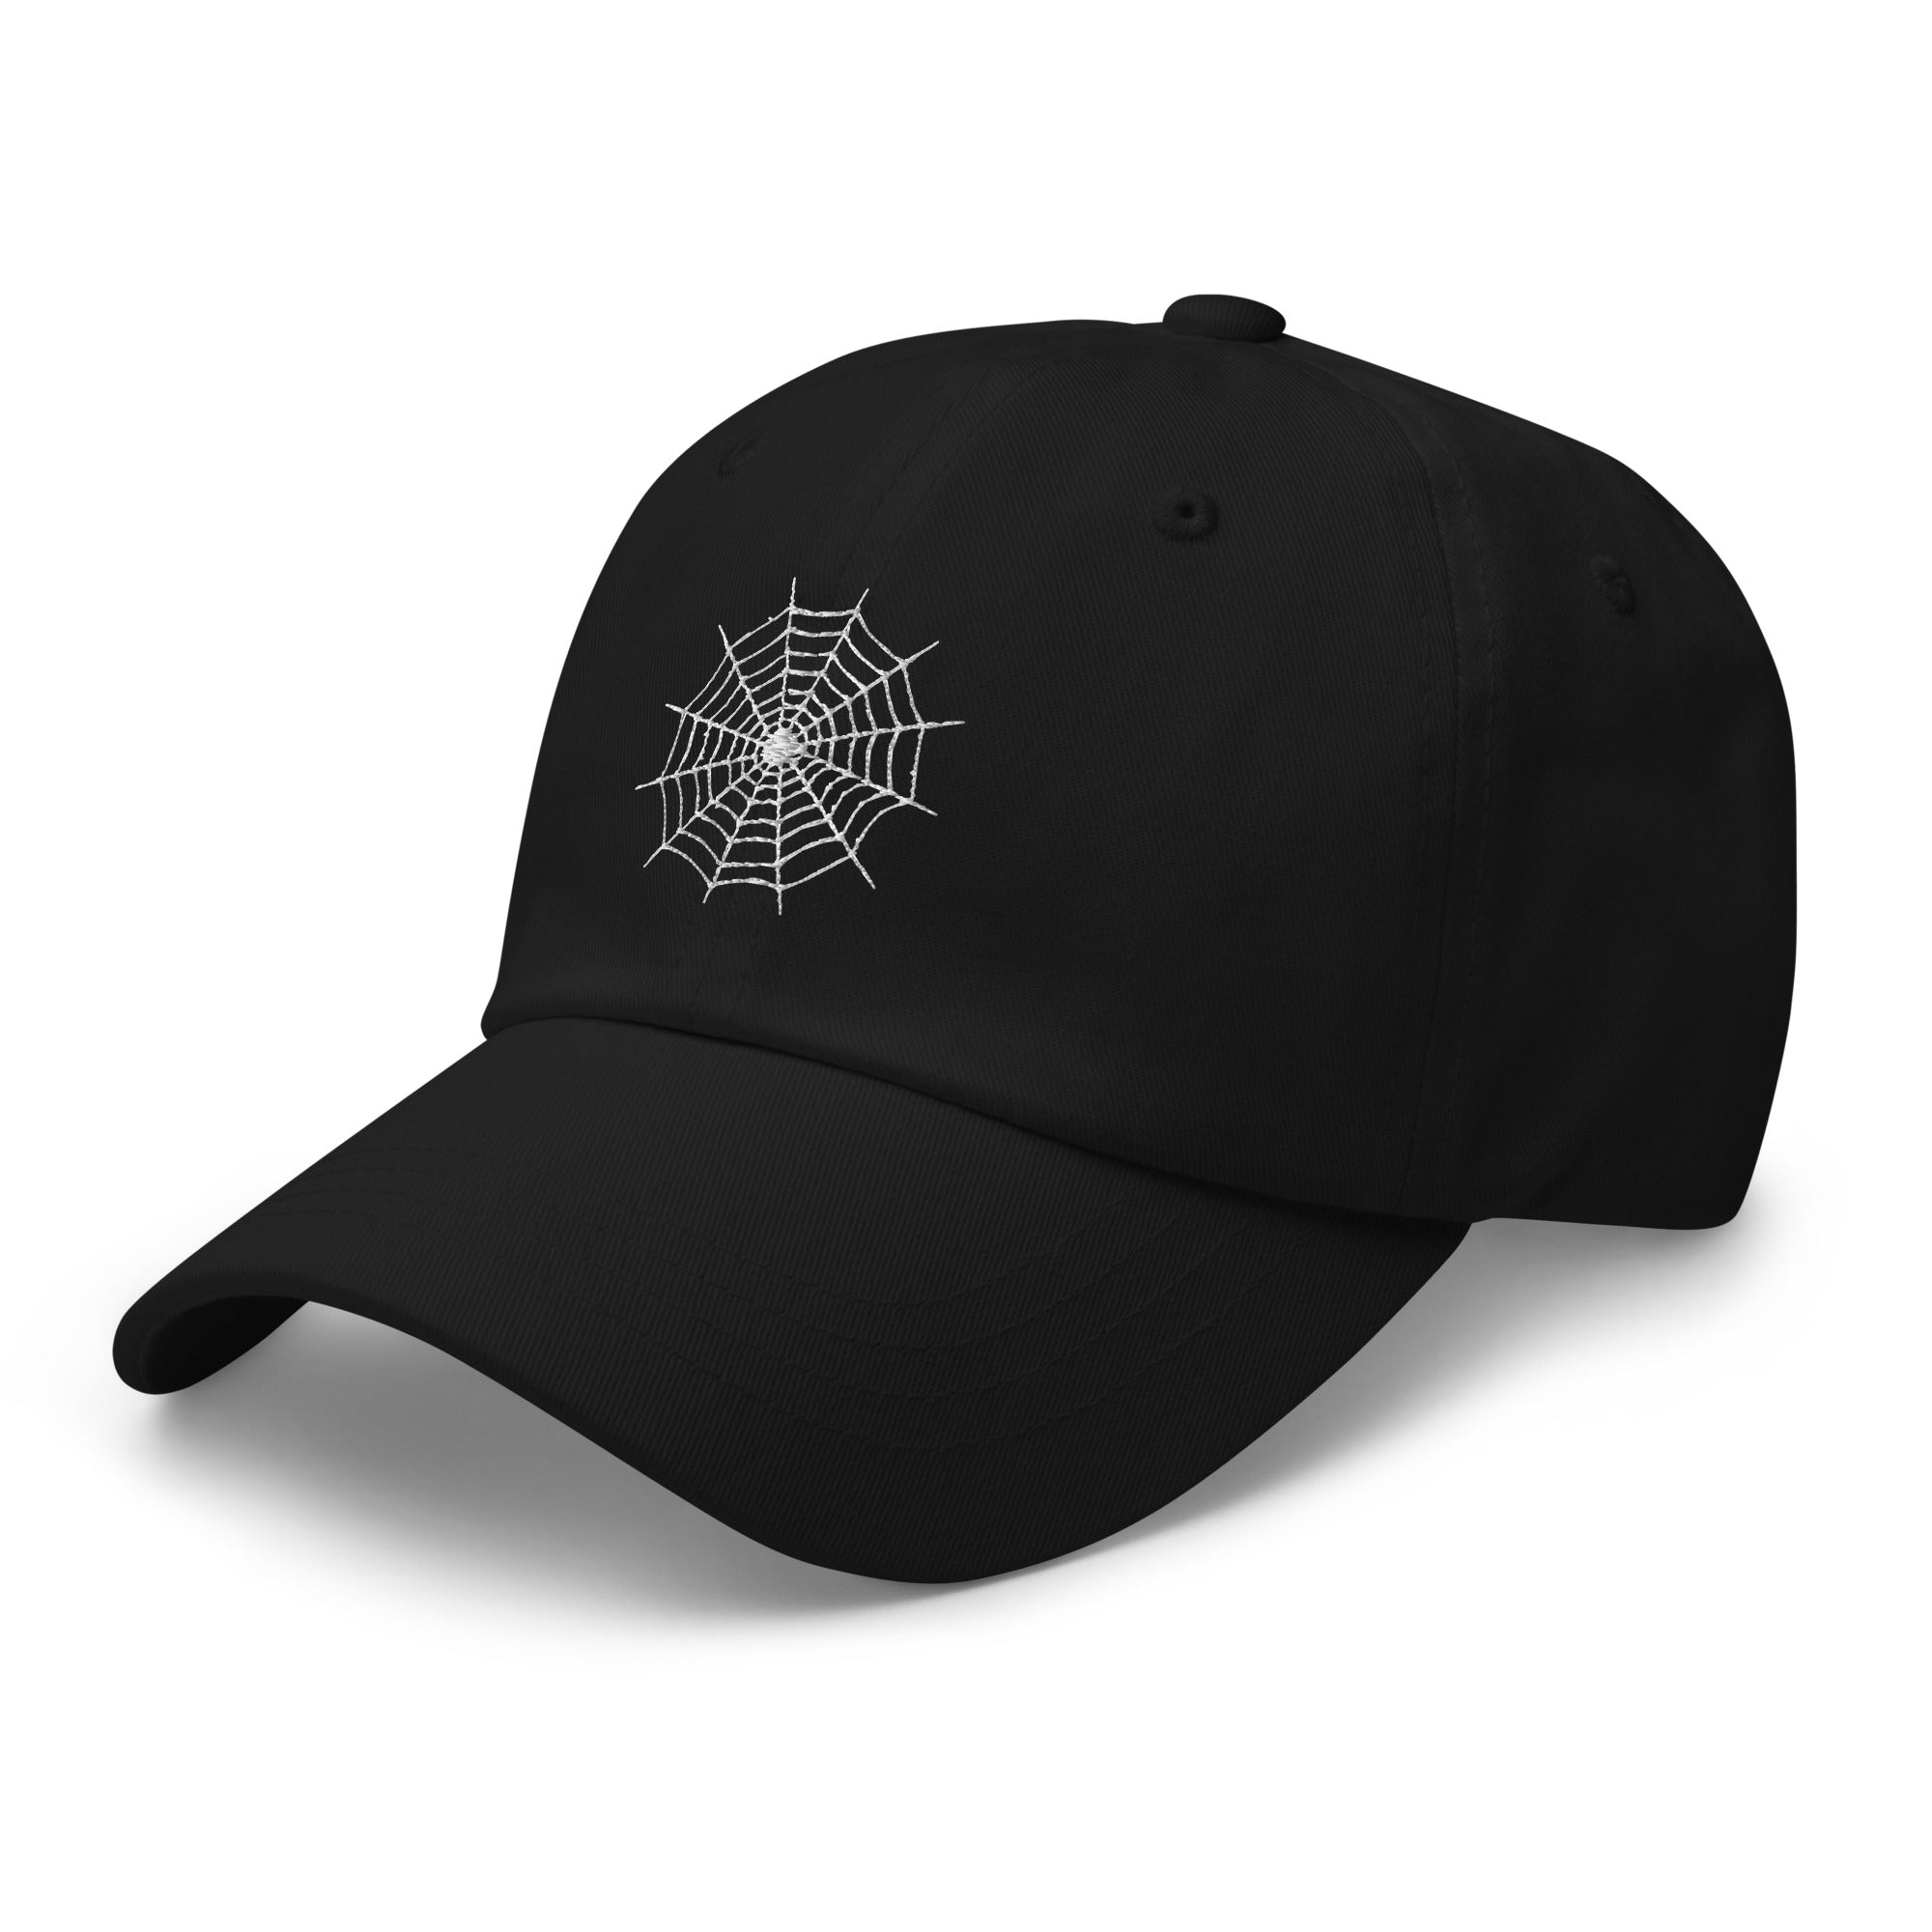 Creepy Spider's Web Embroidered Baseball Cap Goth Halloween Style Spiderweb Dad hat - Edge of Life Designs